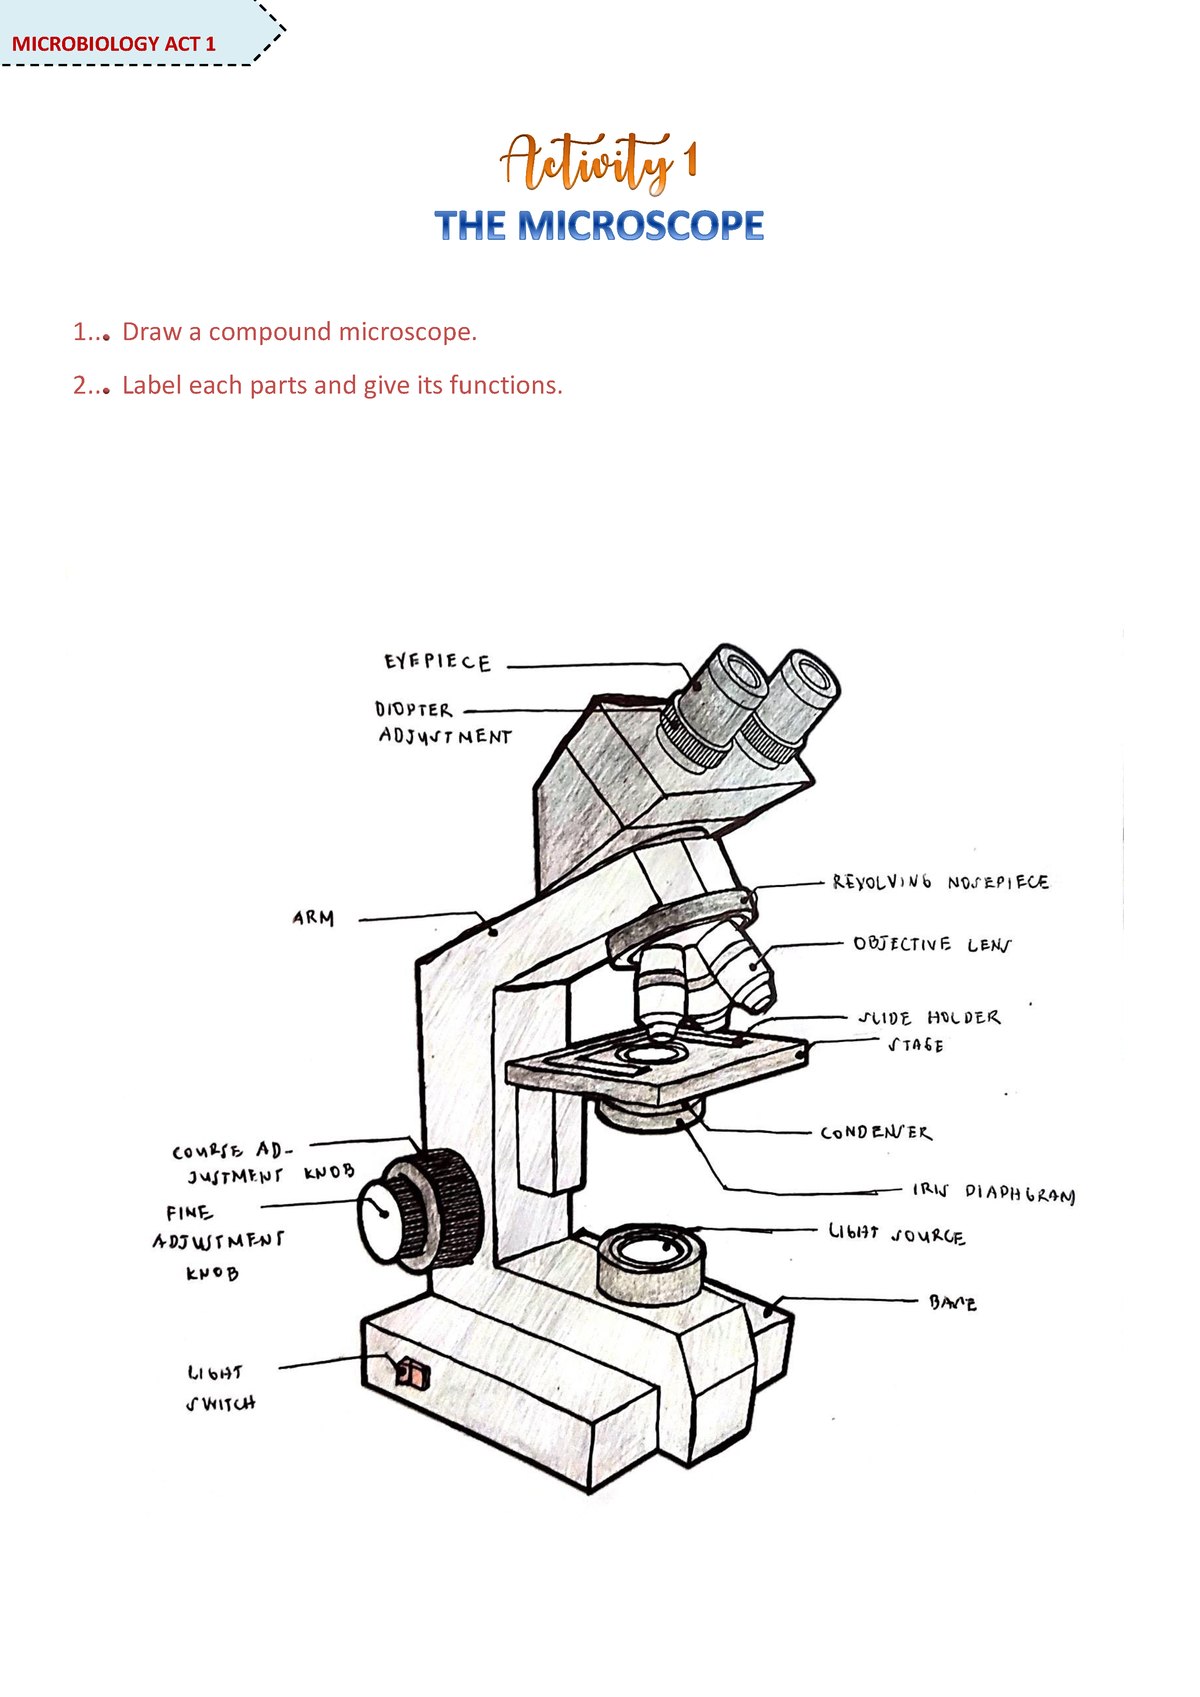 Compound microscope drawing | Clipart Panda - Free Clipart Images